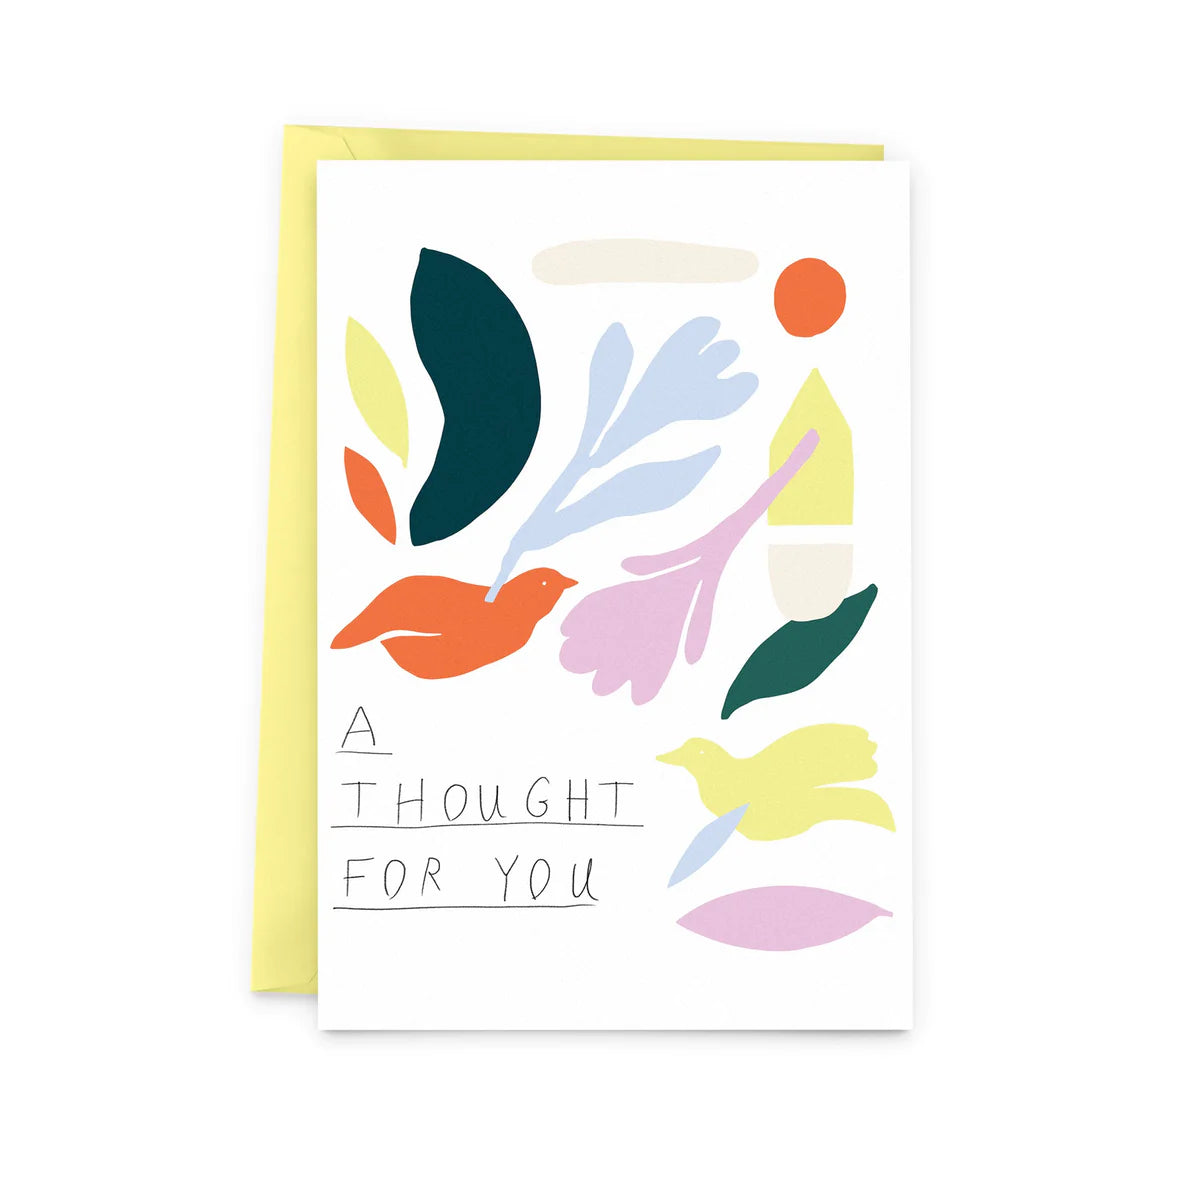 A Thought for You Greeting Card